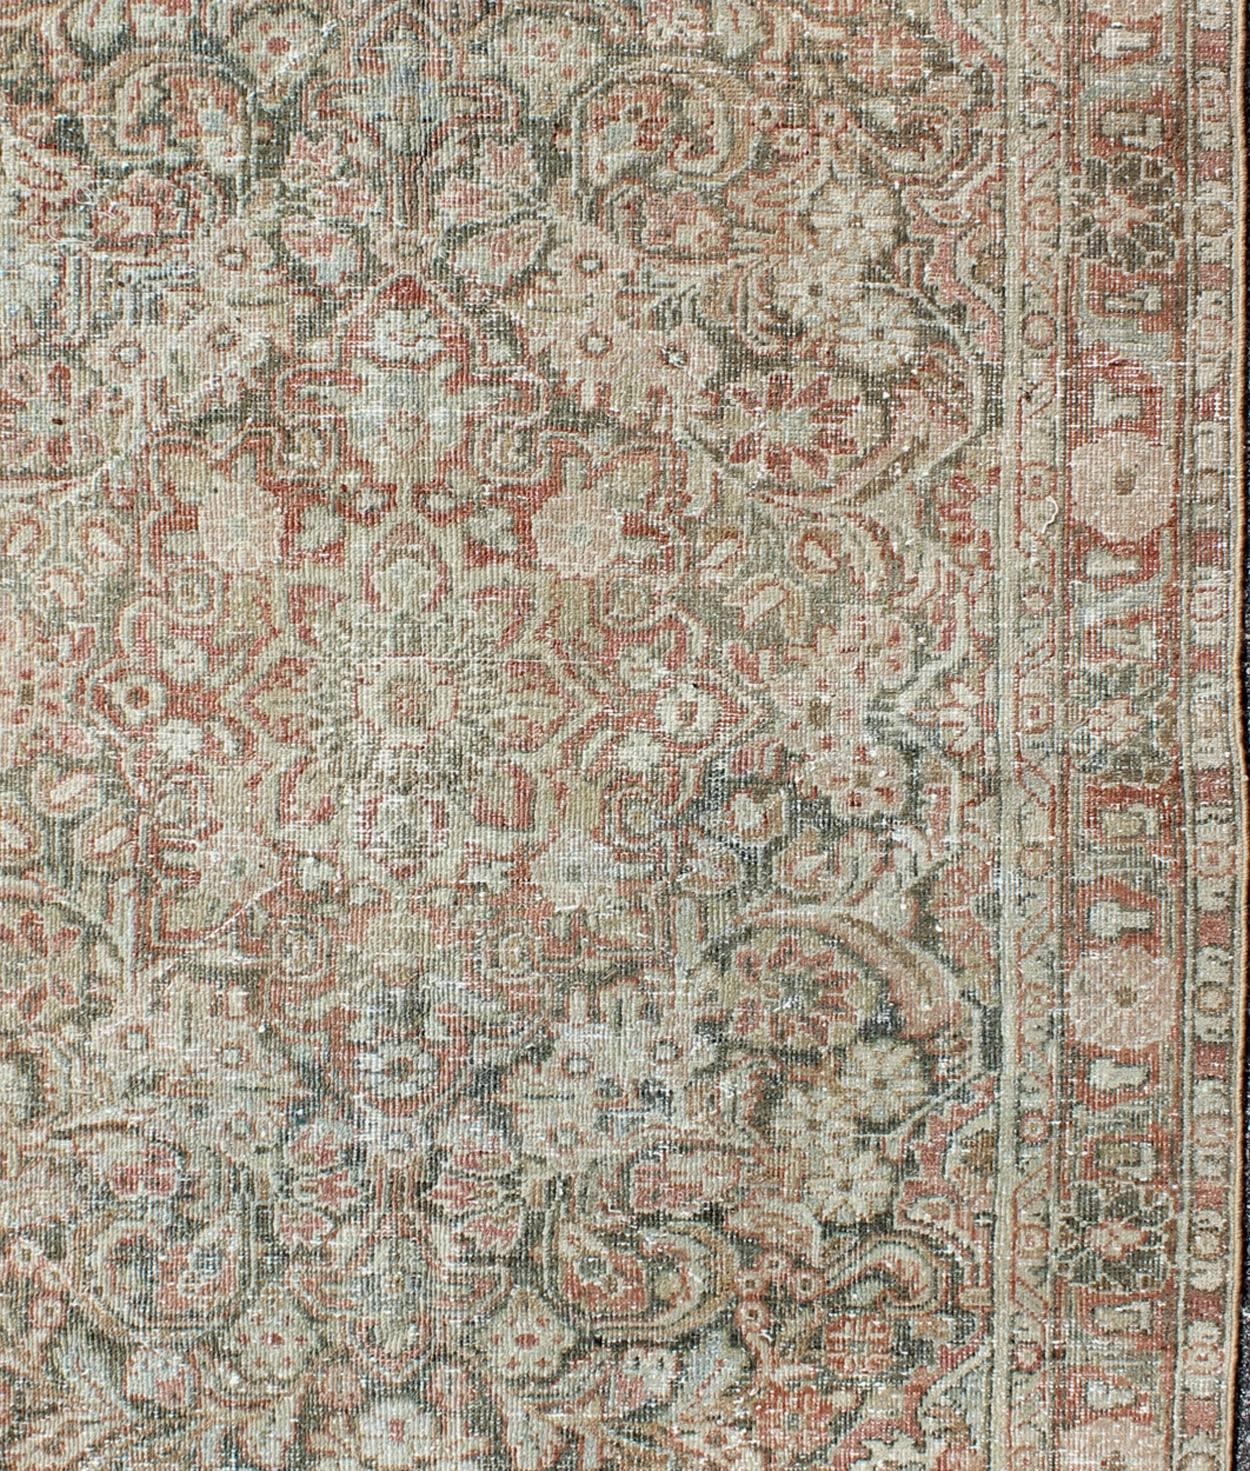 Hand-Knotted Antique Persian Mahal Carpet with Flowers and Palmettes in Faint Green